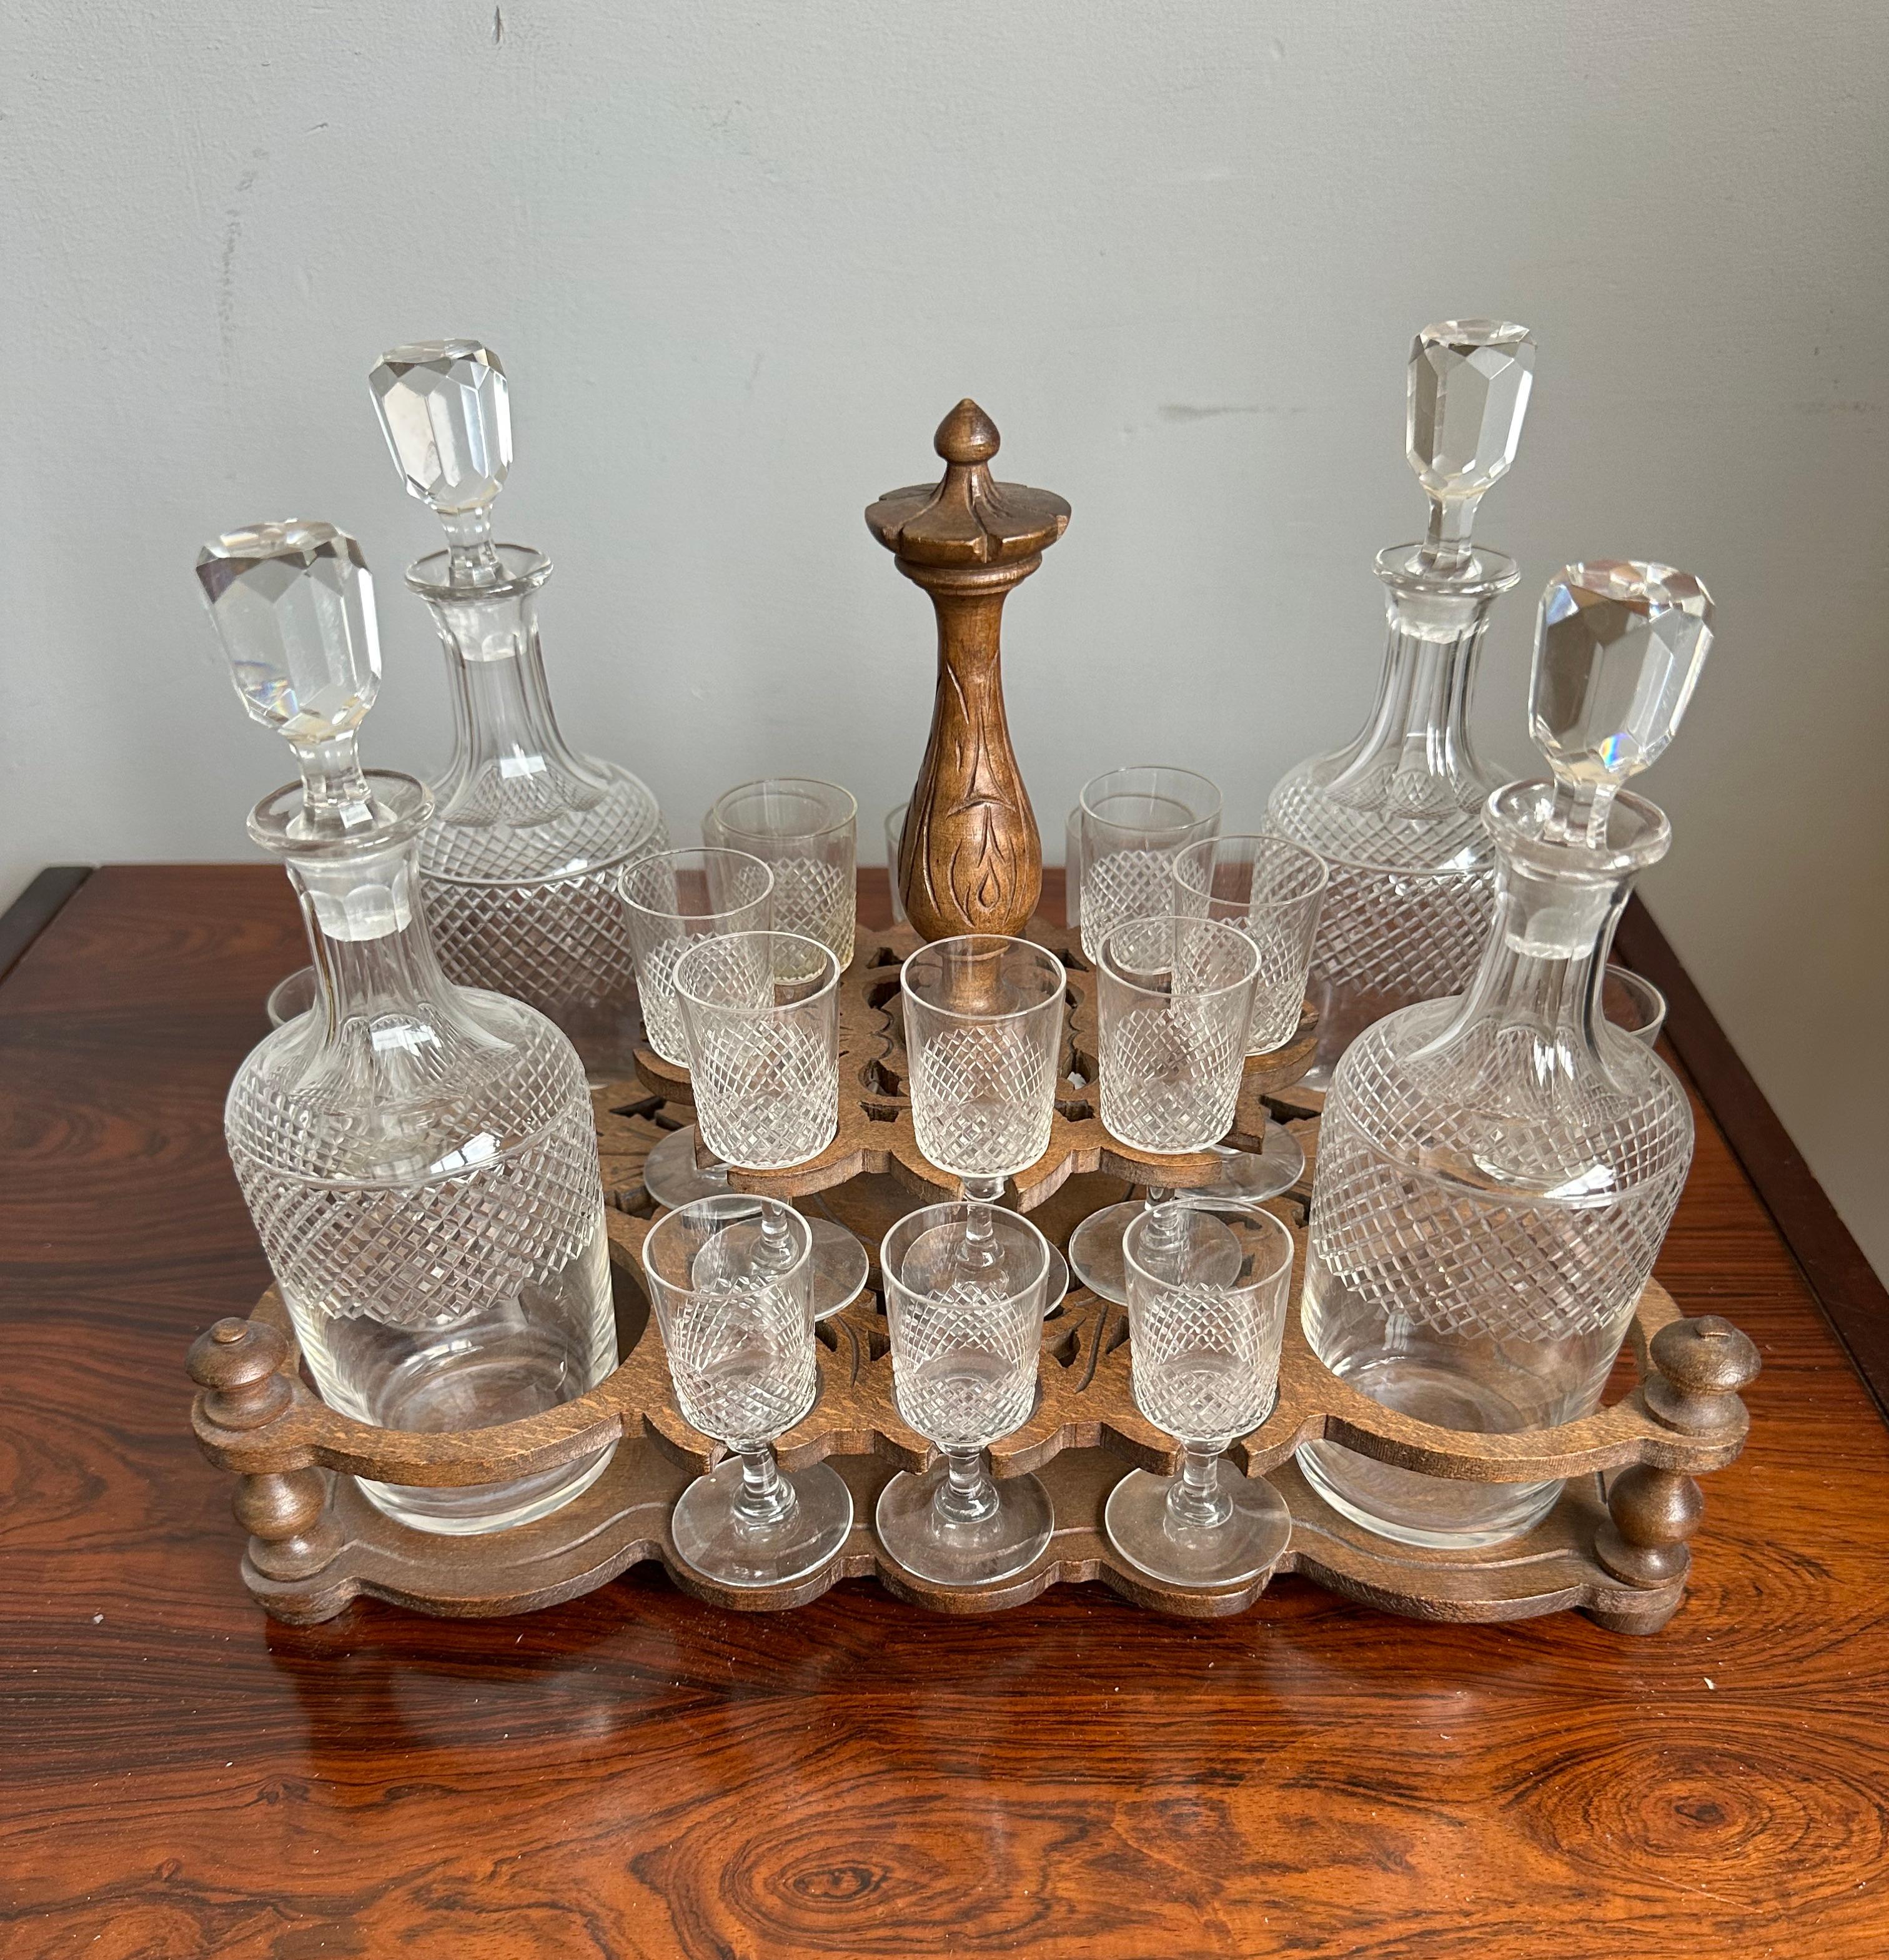 19th Century Victorian Era Black Forest Liquor Tantalus with Glasses & Decanters For Sale 10